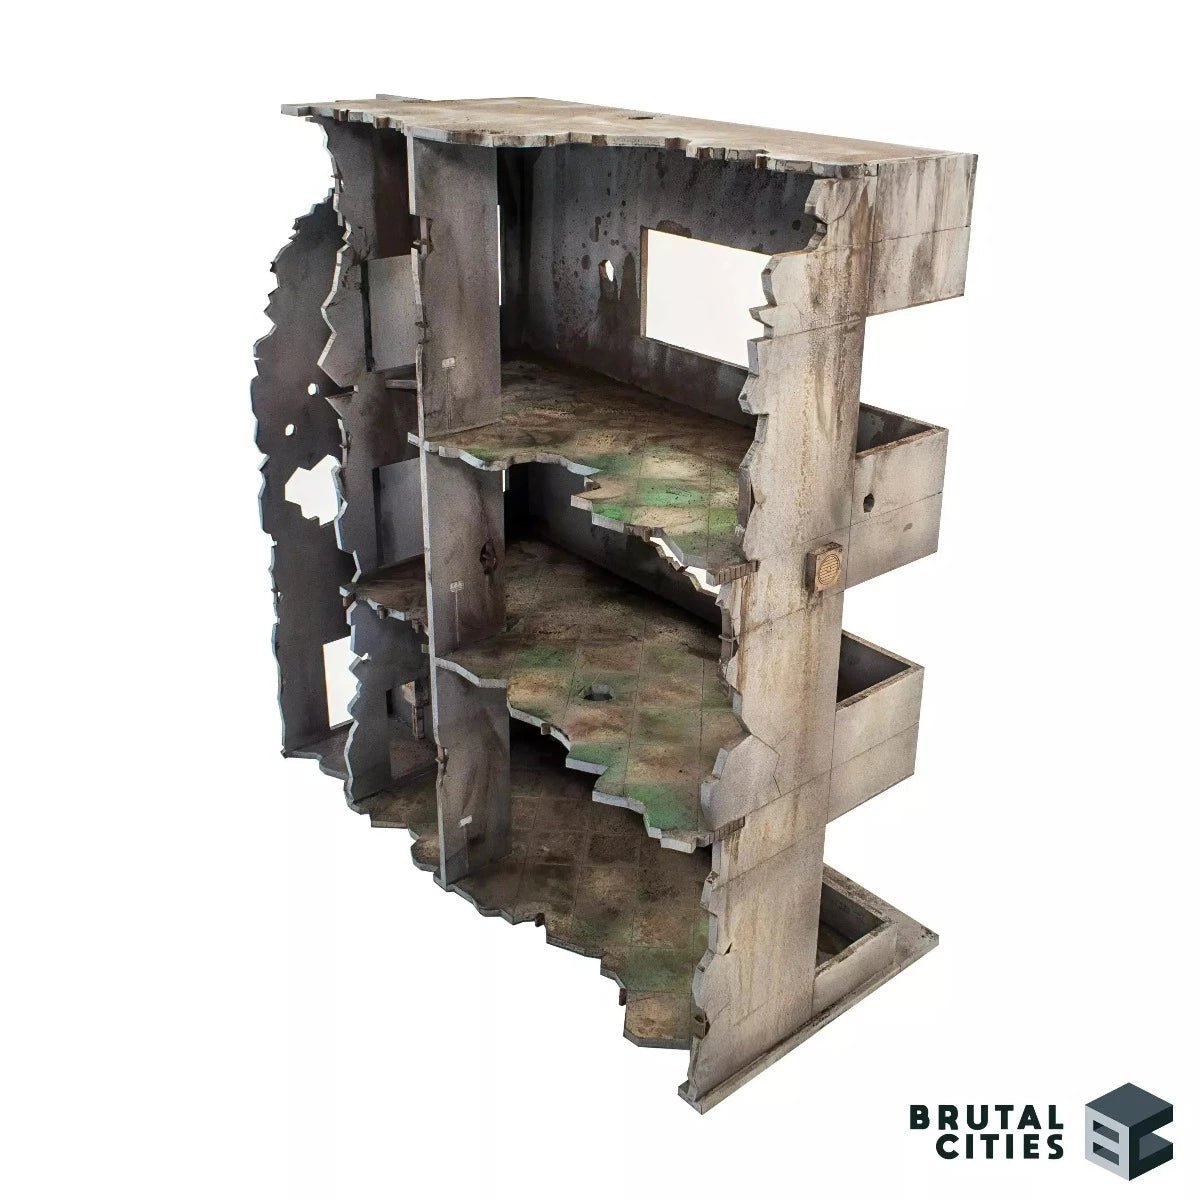 back view of a three level city ruin mdf terrain kit with battle damage